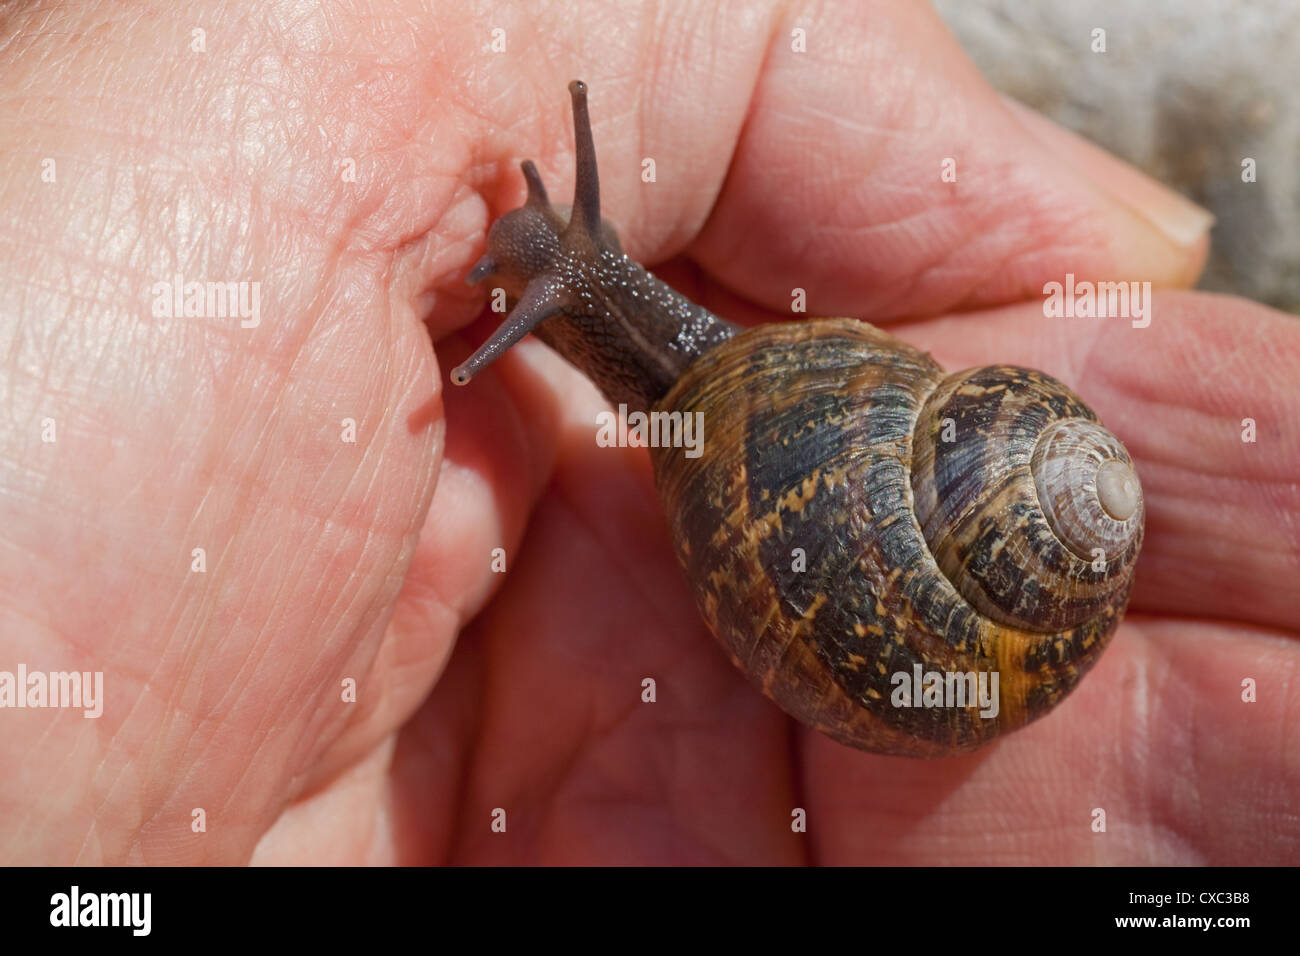 Garden Snails (Helix aspersa). Moving over a man's hand onto the thumb. Stock Photo